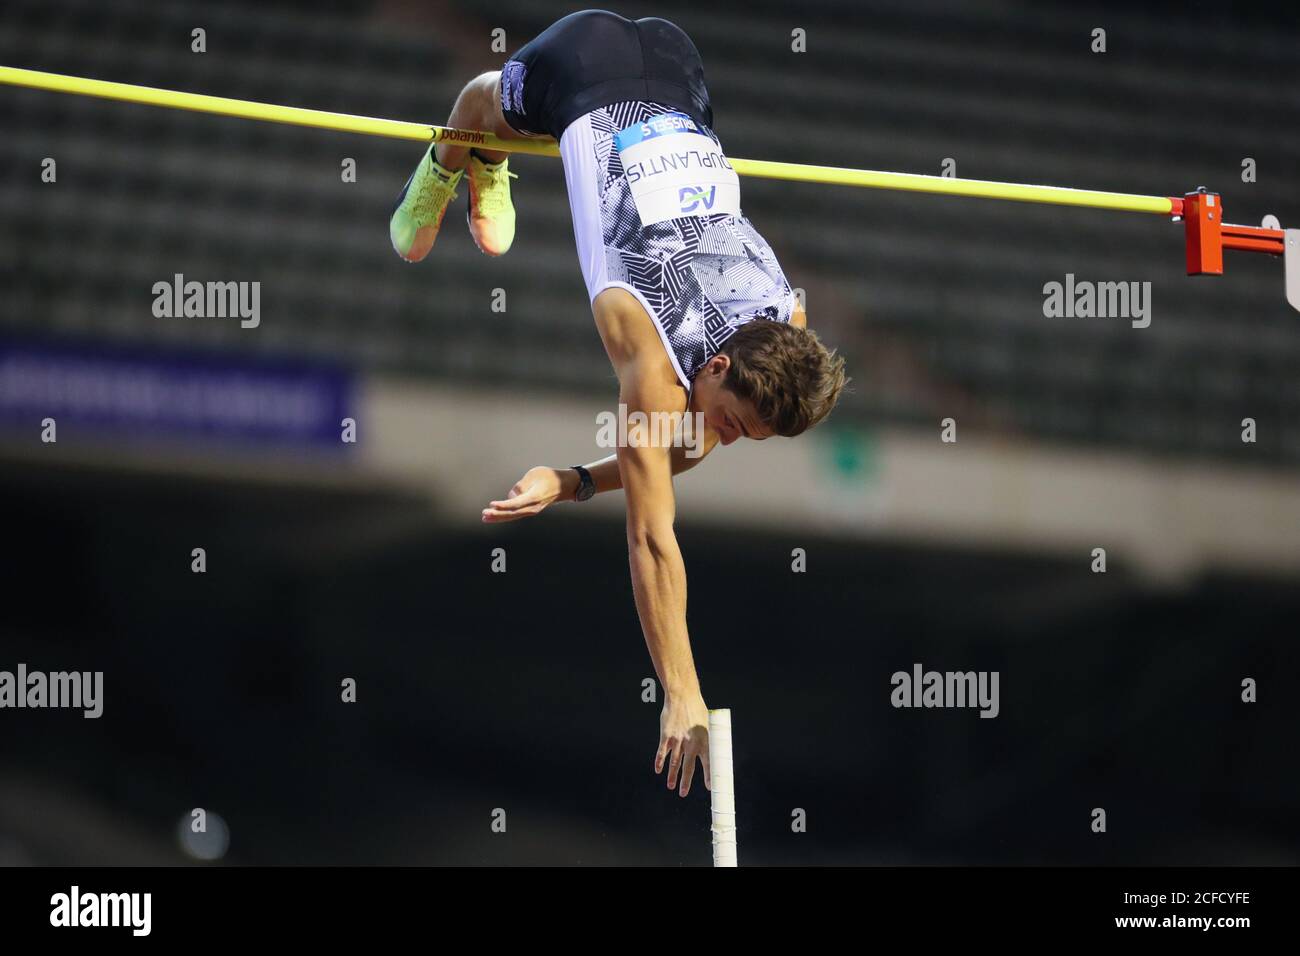 Brussels, Belgium. 4th Sep, 2020. Sweden's Armand Duplantis competes during the Pole Vault Men at the Diamond League Memorial Van Damme athletics event at the King Baudouin stadium in Brussels, Belgium, Sept. 4, 2020. Credit: Zheng Huansong/Xinhua/Alamy Live News Stock Photo